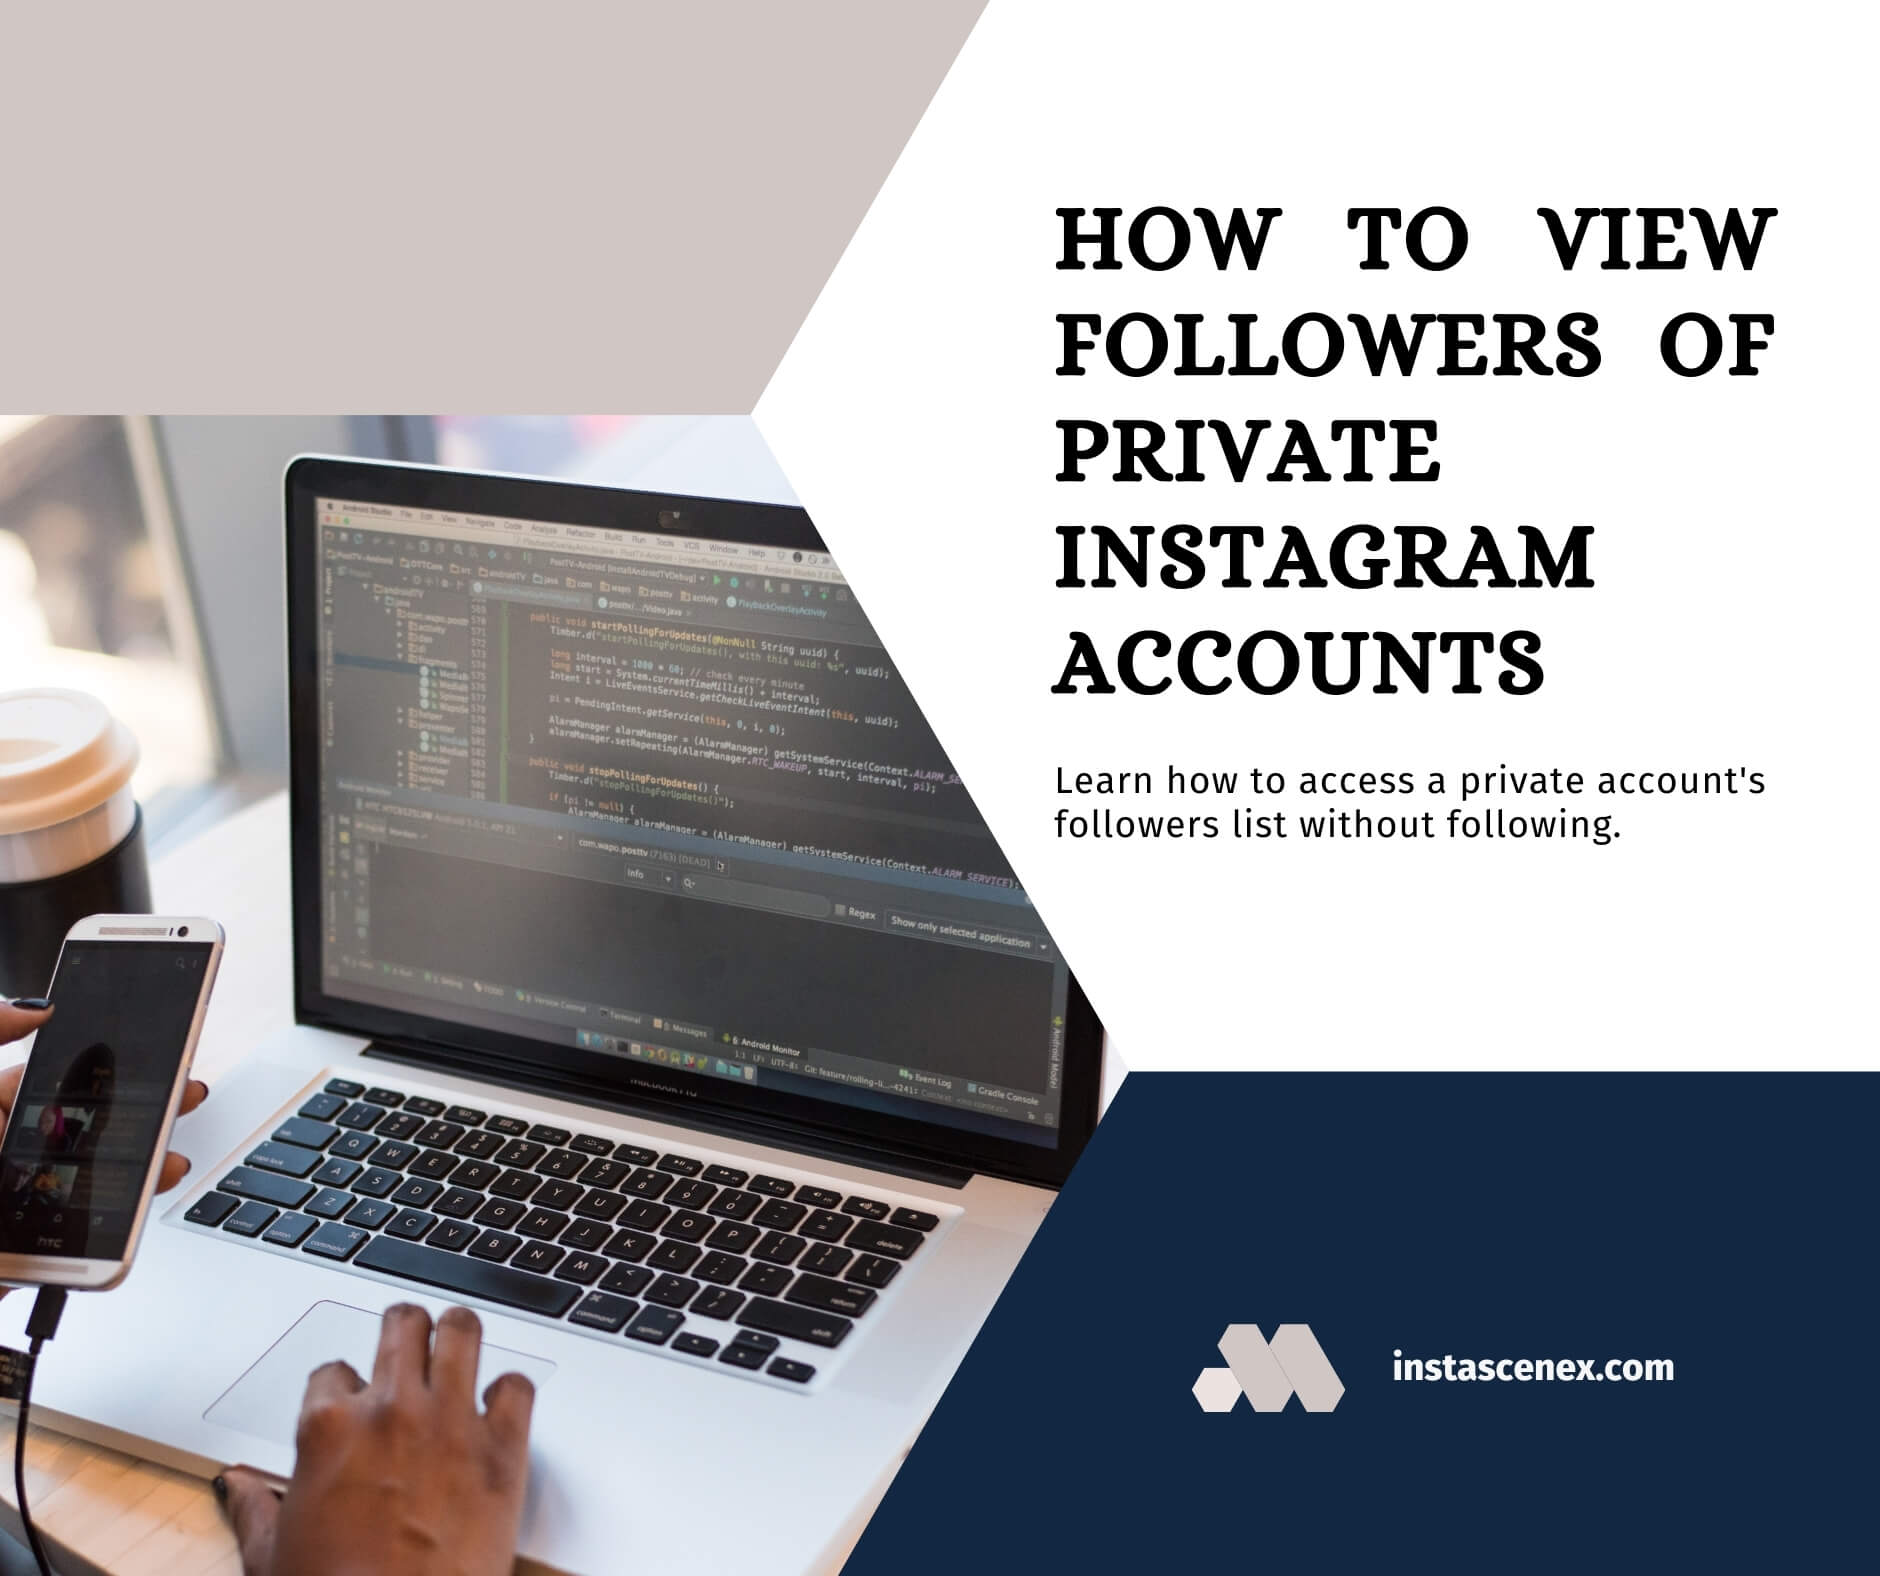 How to View Followers of Private Instagram Accounts